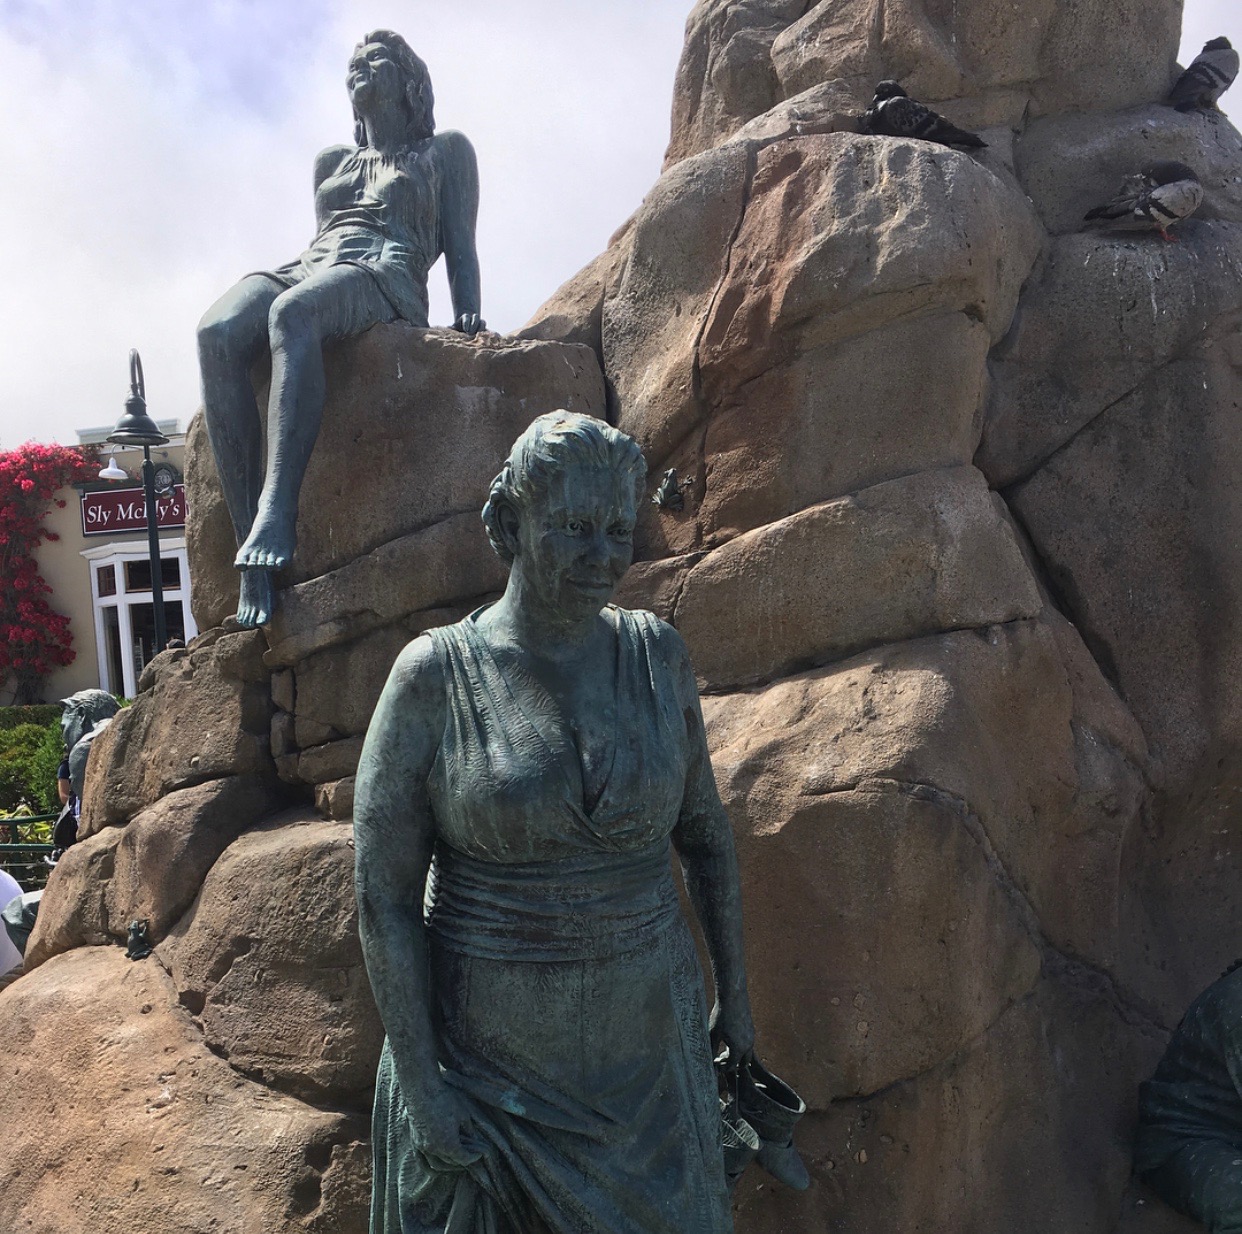 A National Monument to John Steinbeck and Cannery Row